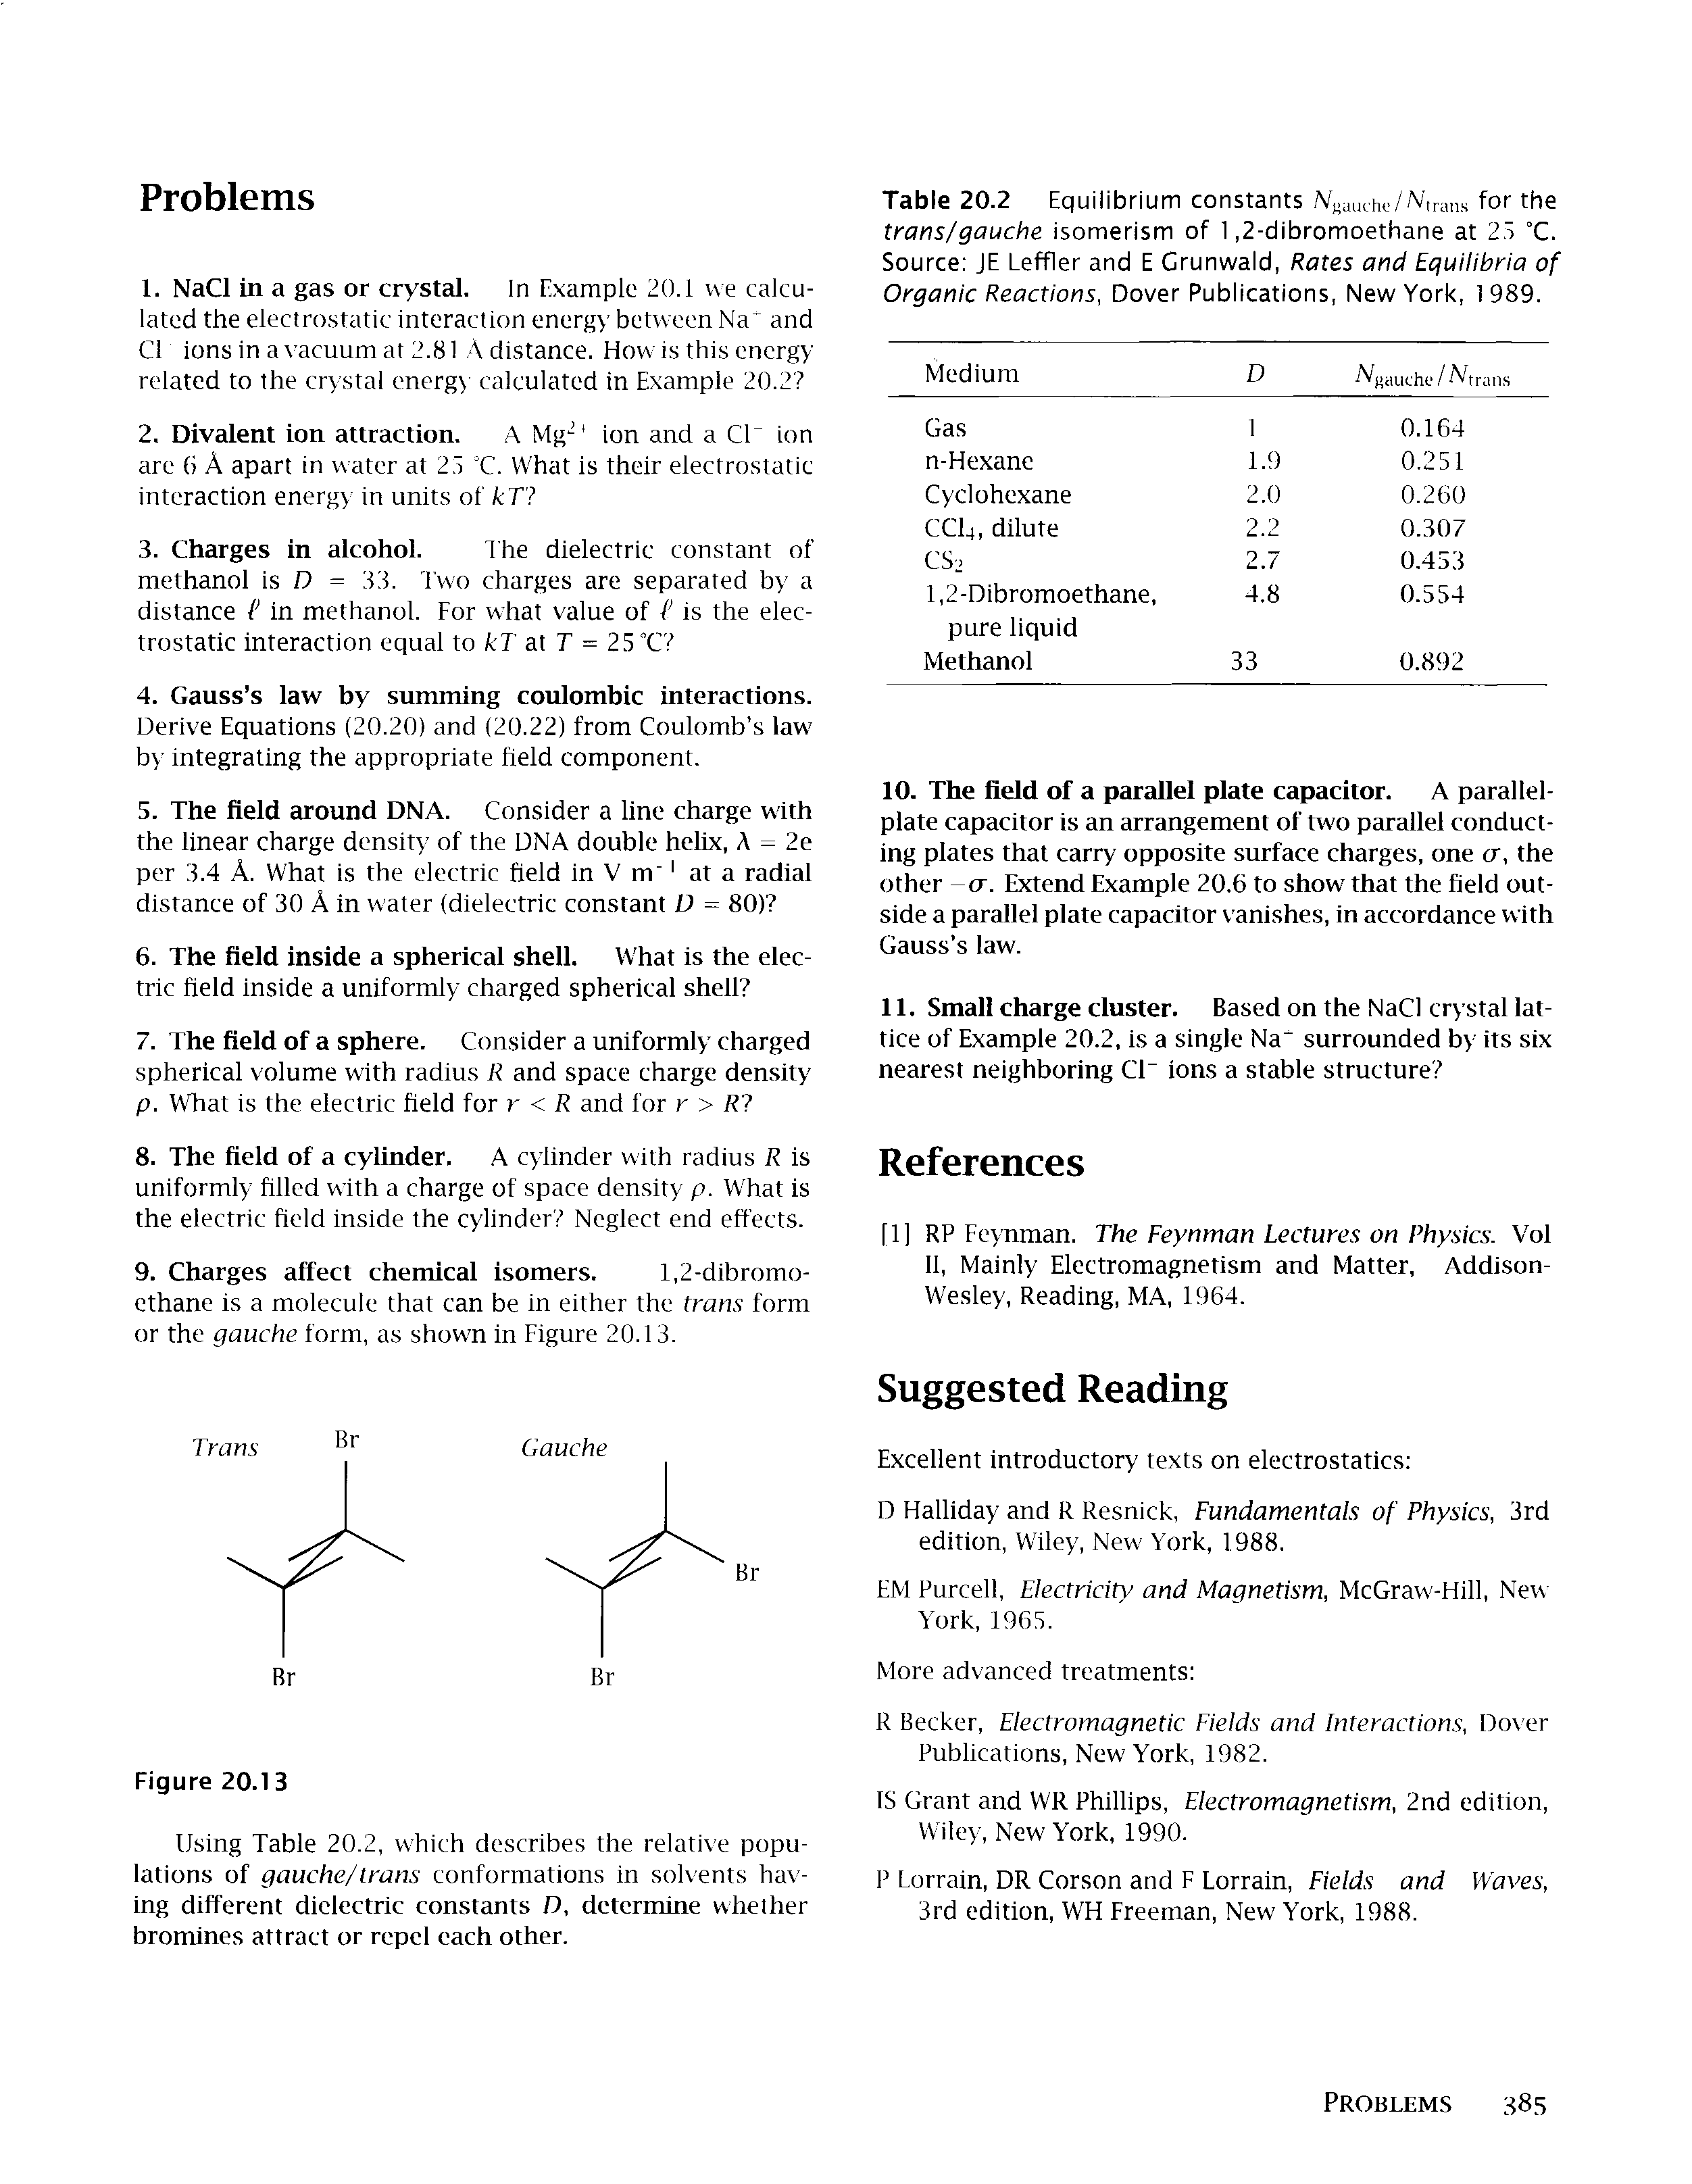 Table 20.2 Equilibrium constants N autho/N tran,s for the trans/gauche isomerism of 1,2-dibromoethane at 25 °C. Source JE Leffler and E Crunwald, Rates and Equilibria of Organic Reactions, Dover Publications, New York, 1989.